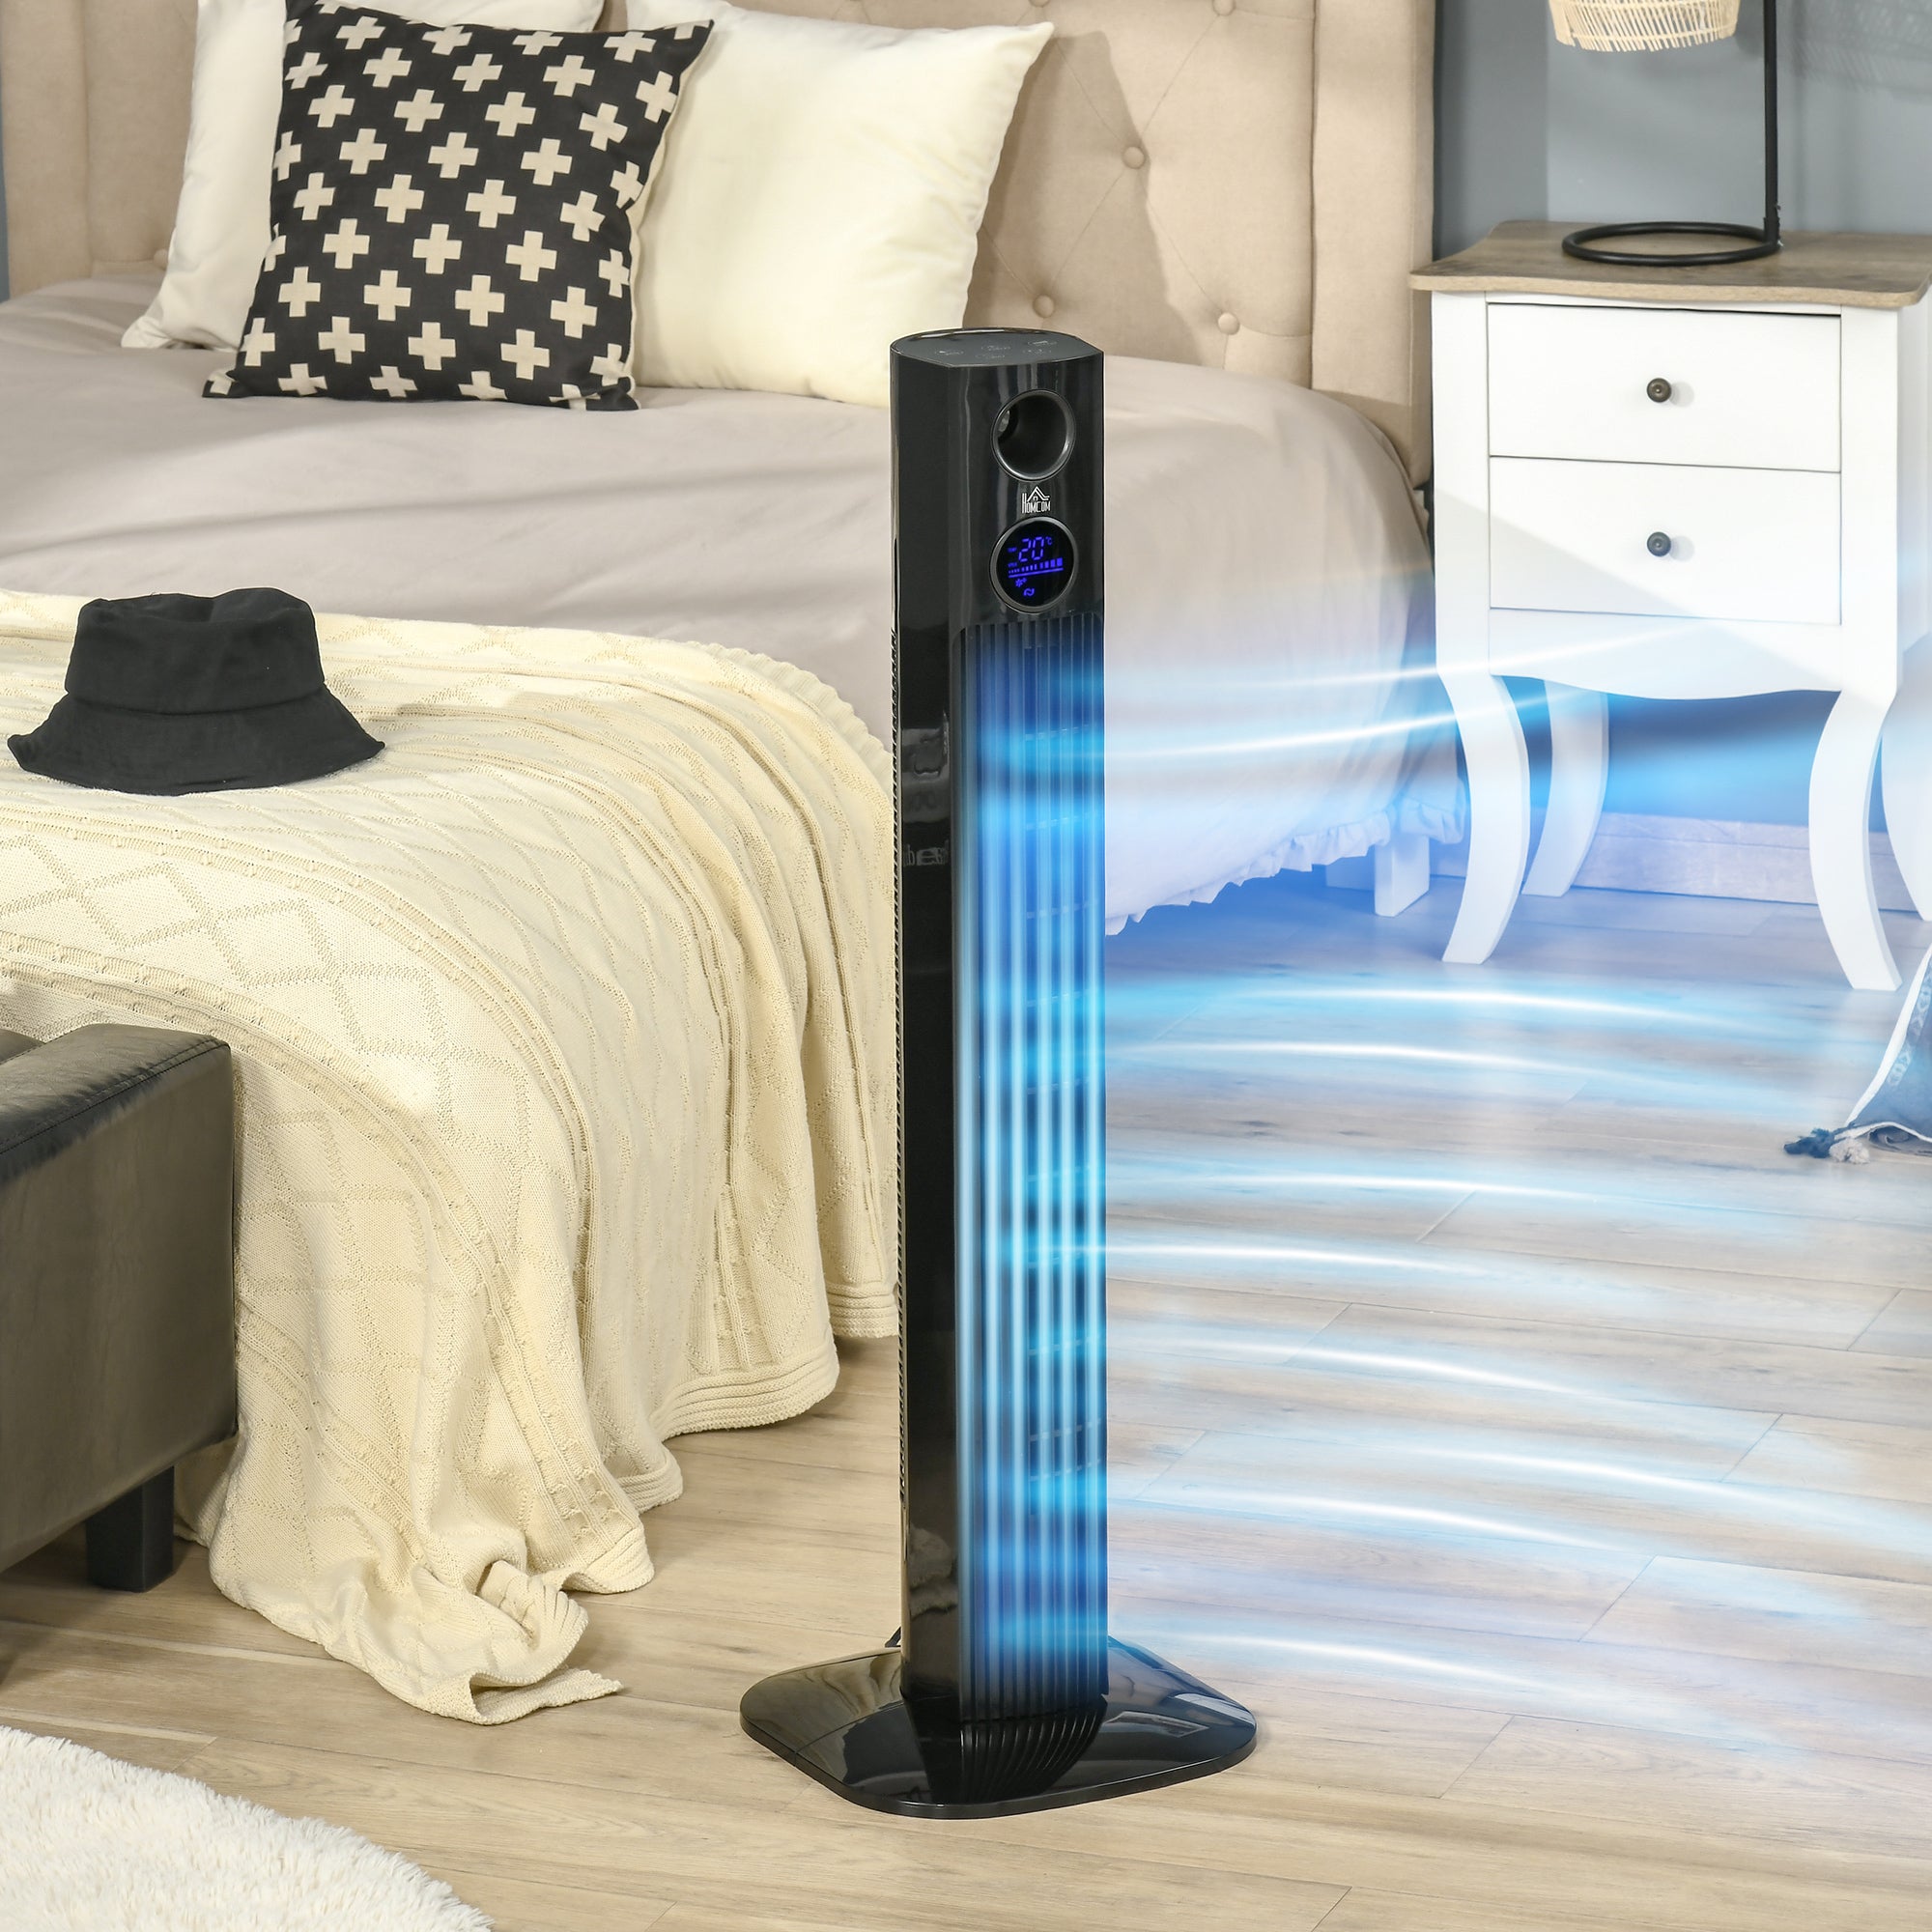 37.75" Tower Fan for Bedroom Cooling with Aroma black-abs